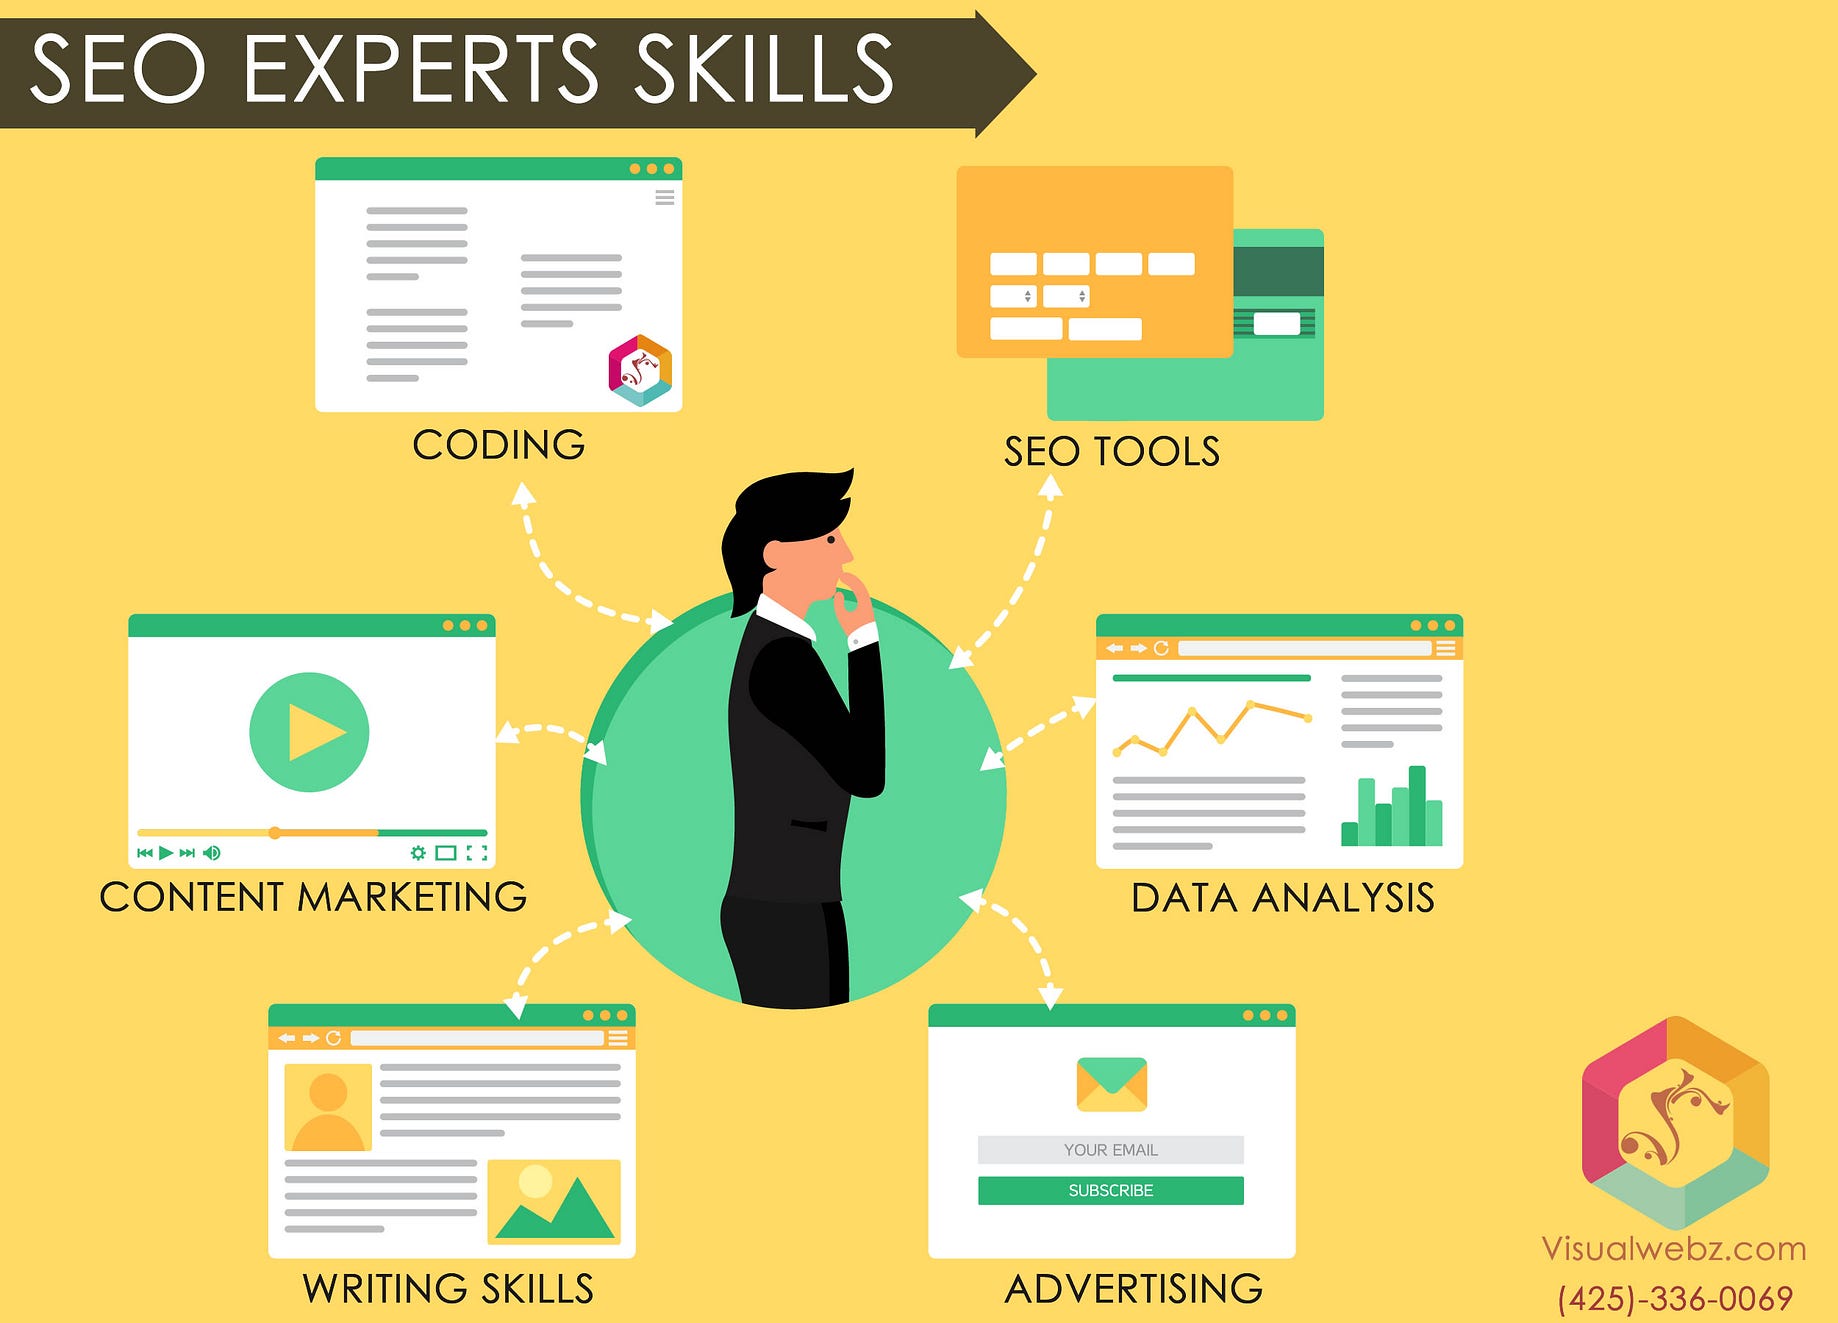 7 Best Sites to Hire a SEO Expert in 2021